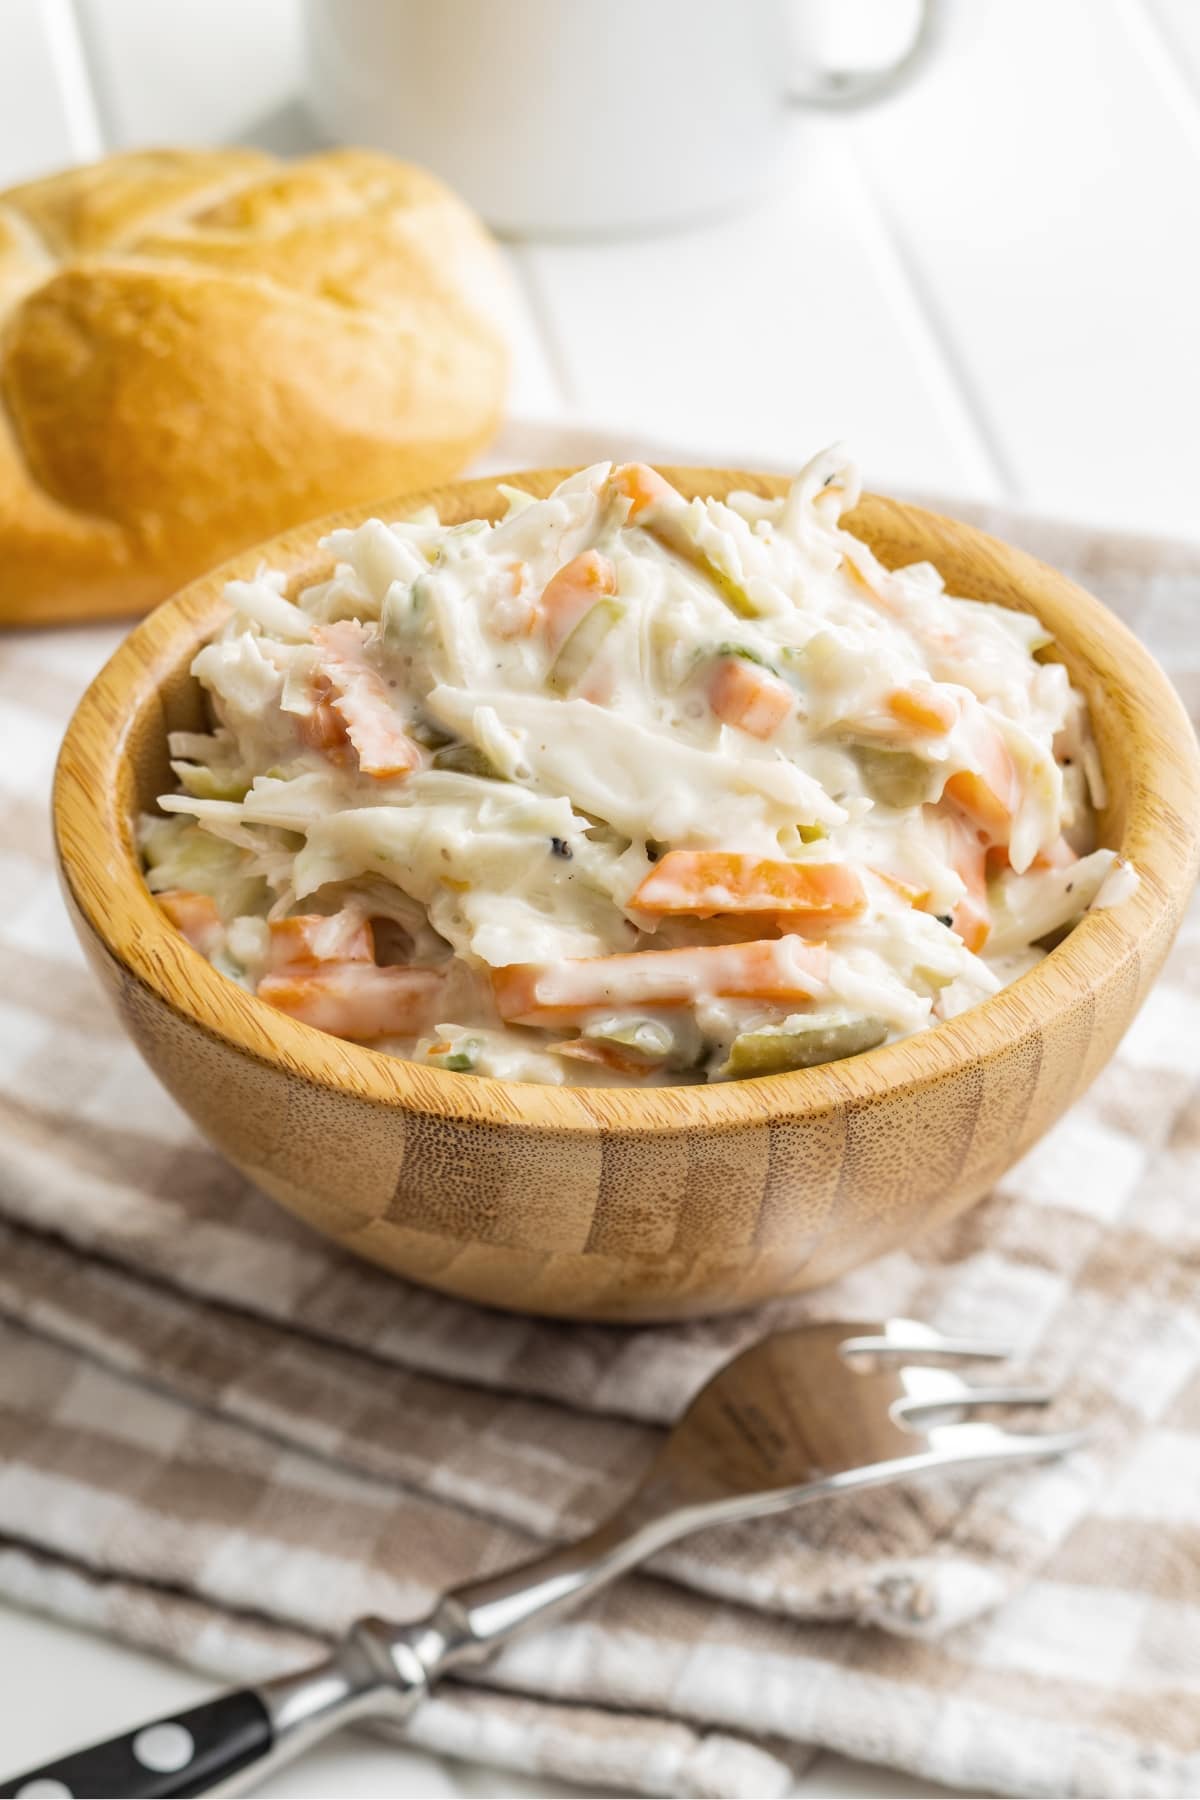 Creamy Coleslaw in a Bowl Served with Bread